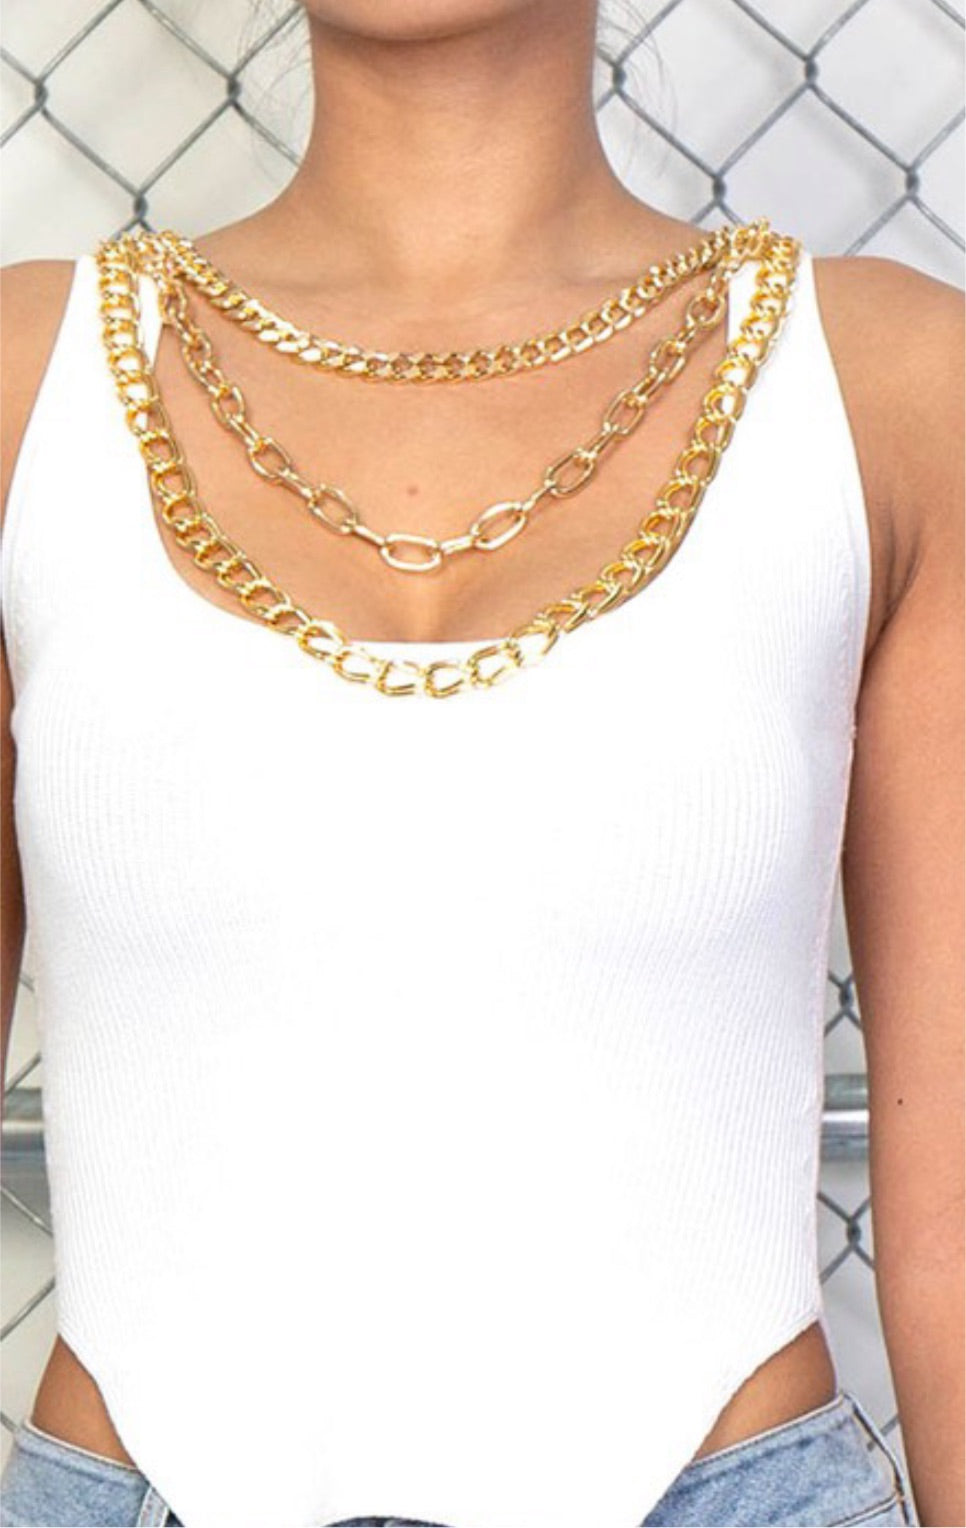 U Neck Gold Chains Top